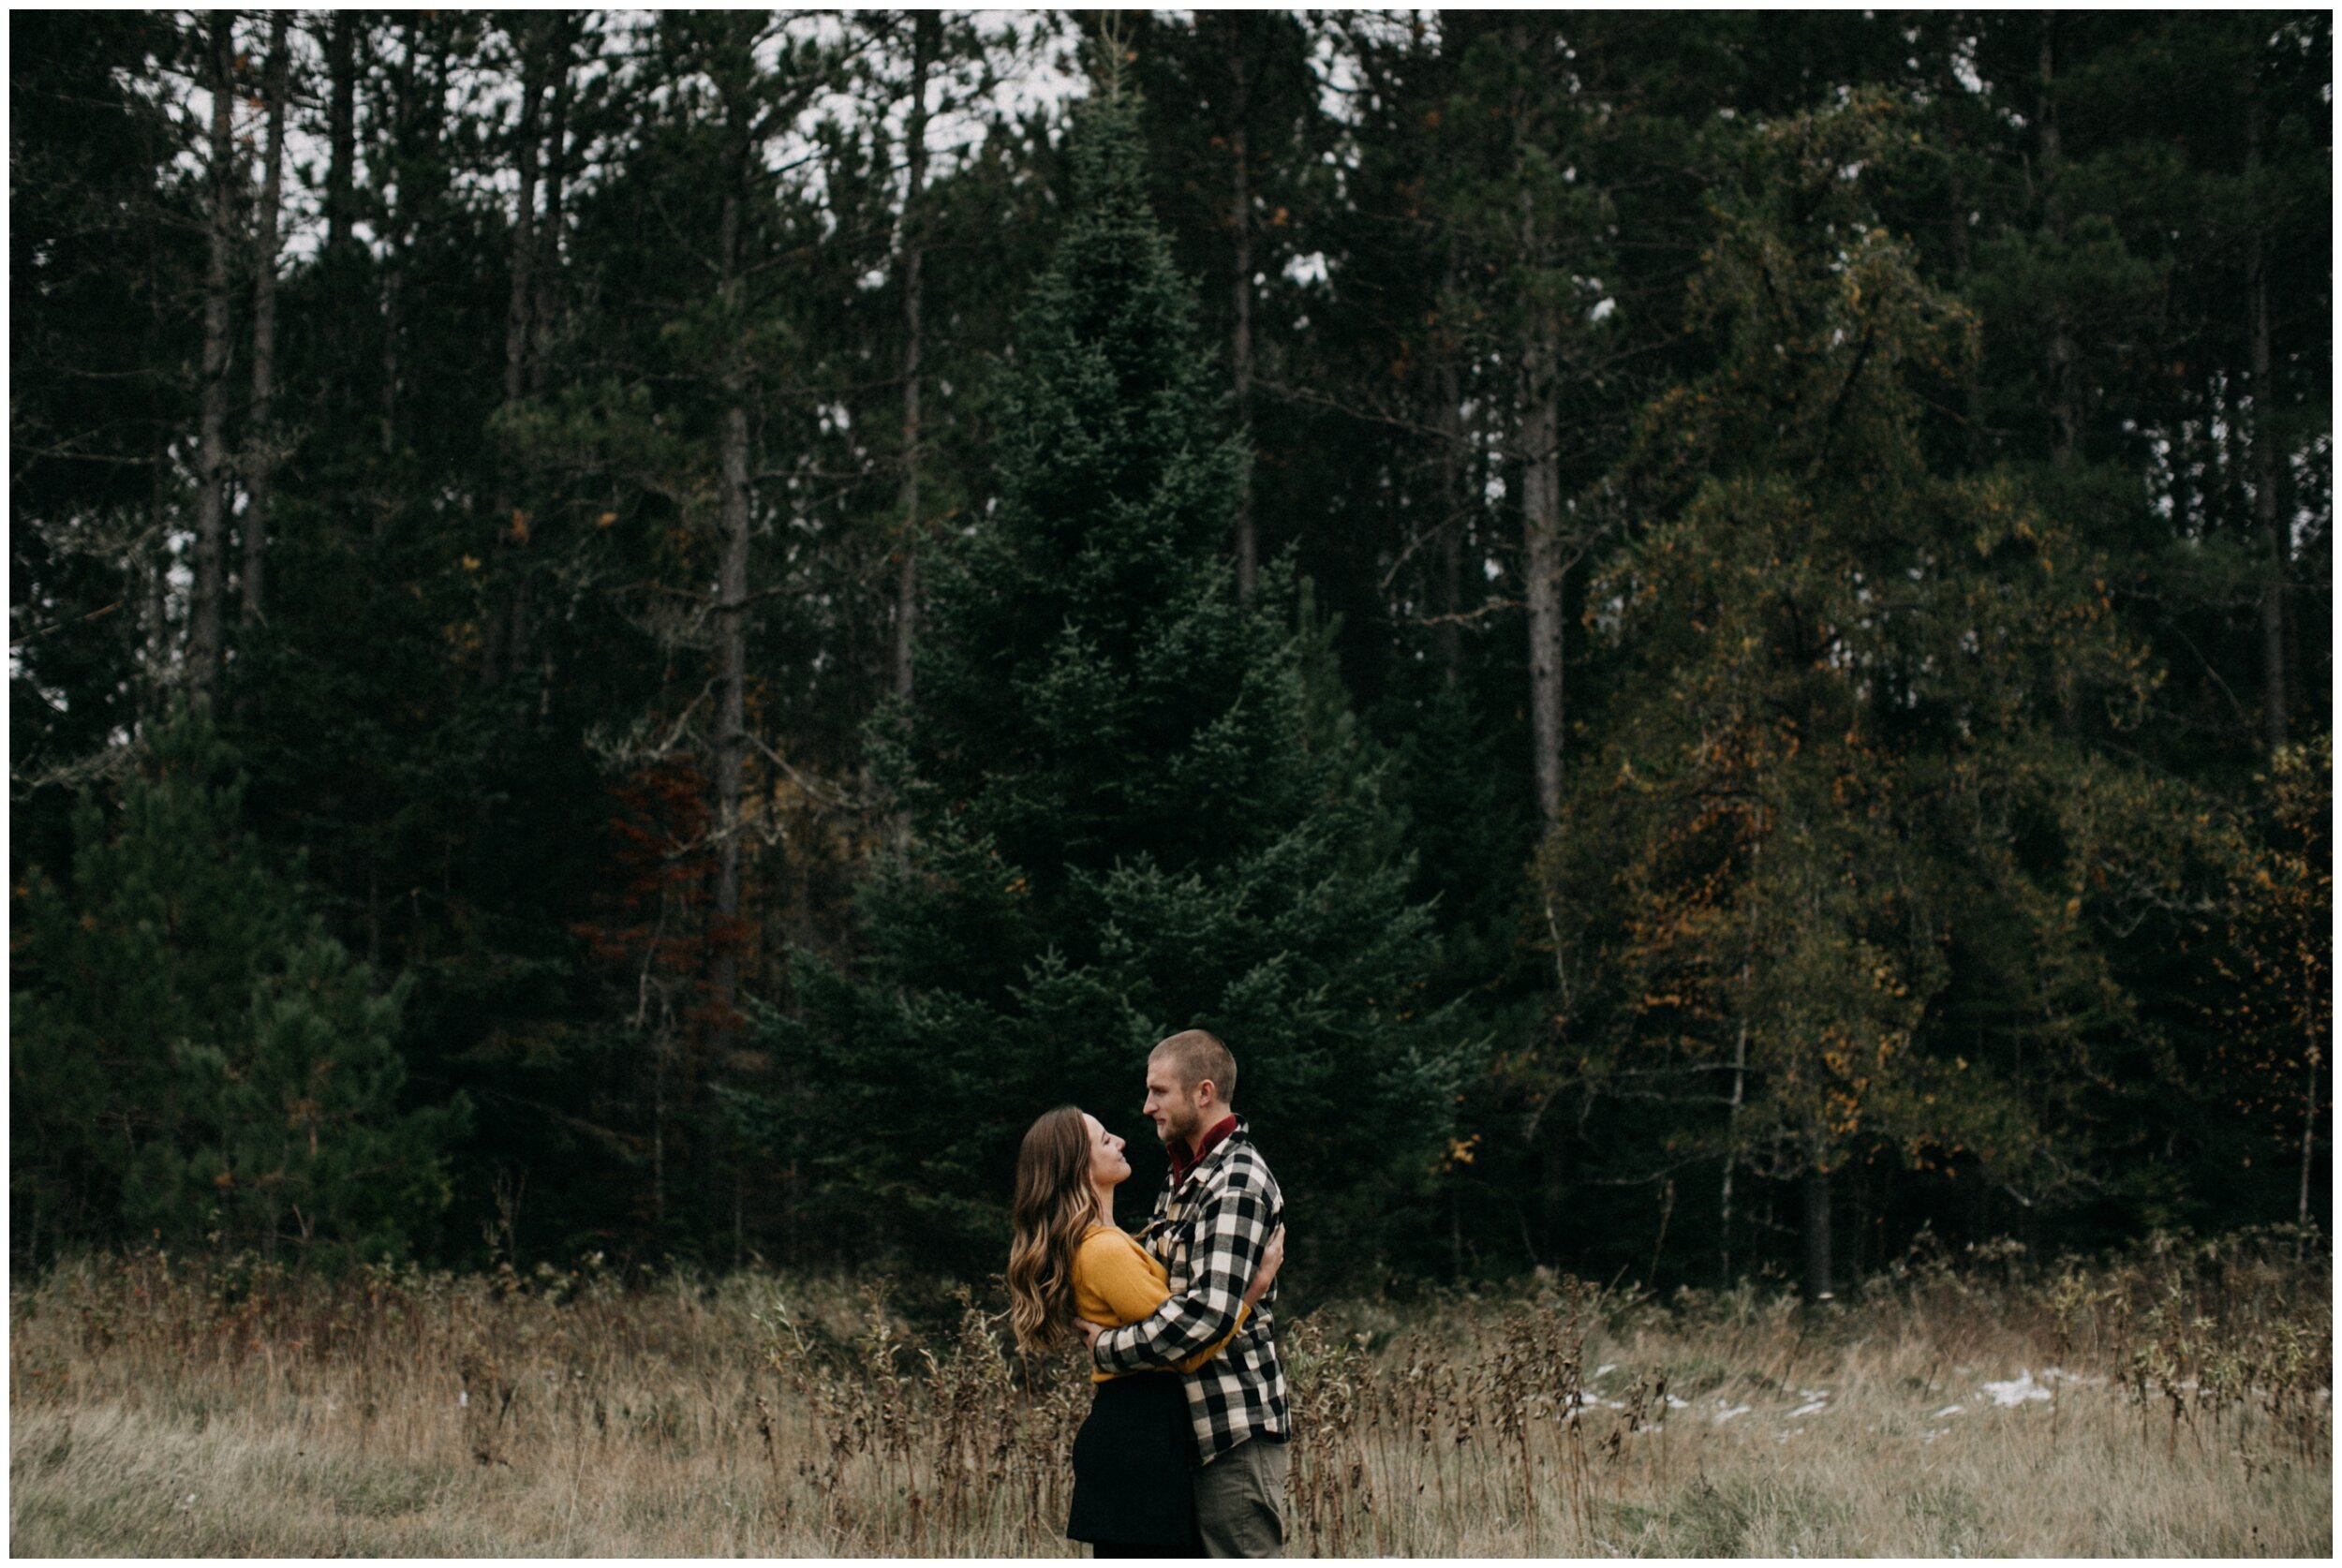 Northern Minnesota fall engagement session in the woods